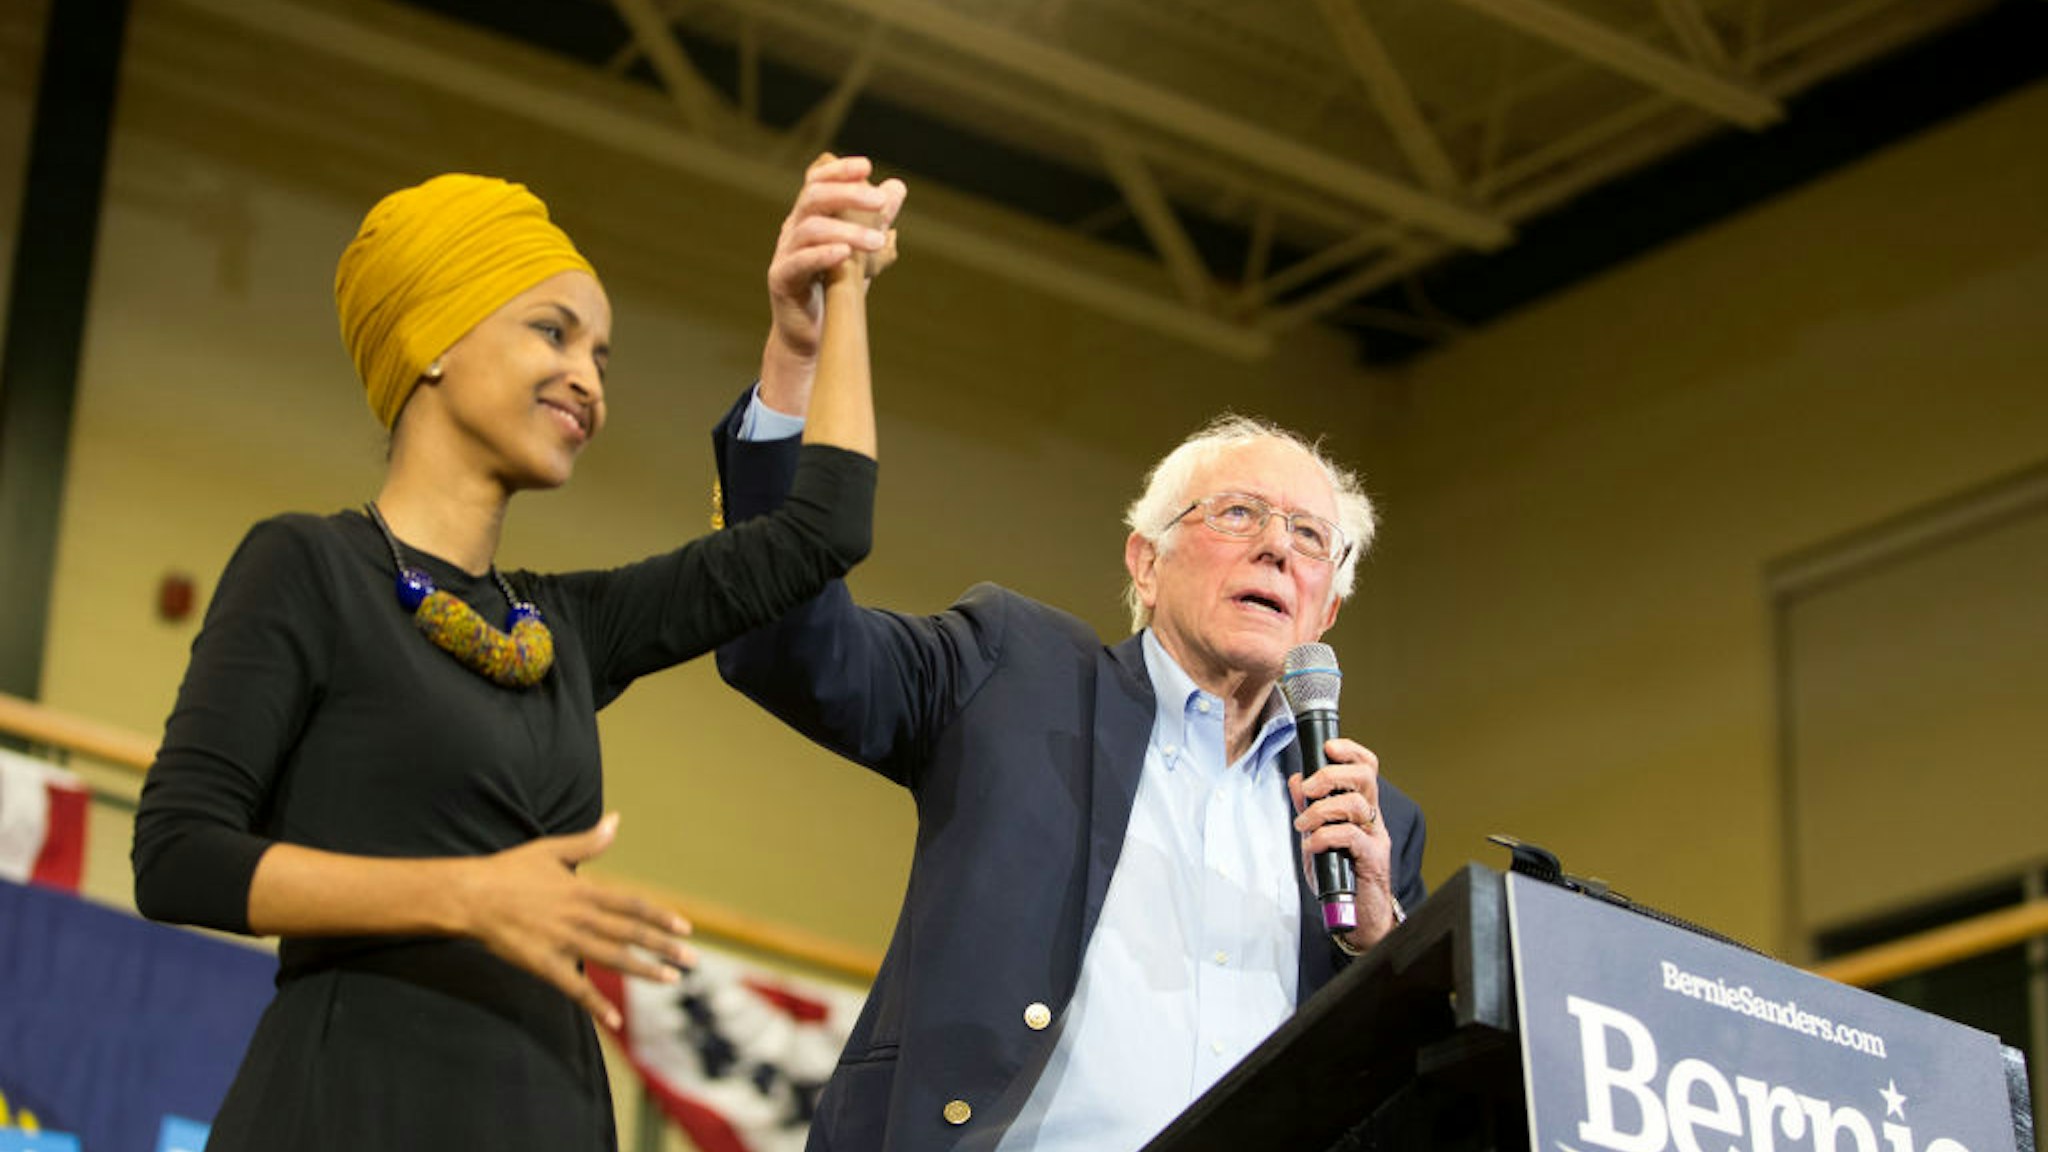 Democratic presidential candidate, Sen. Bernie Sanders (I-VT), and Representative Ilhan Omar (D-MN) on stage during Sanders' event at Nashua Community College on December 13, 2019 in Nashua, New Hampshire.